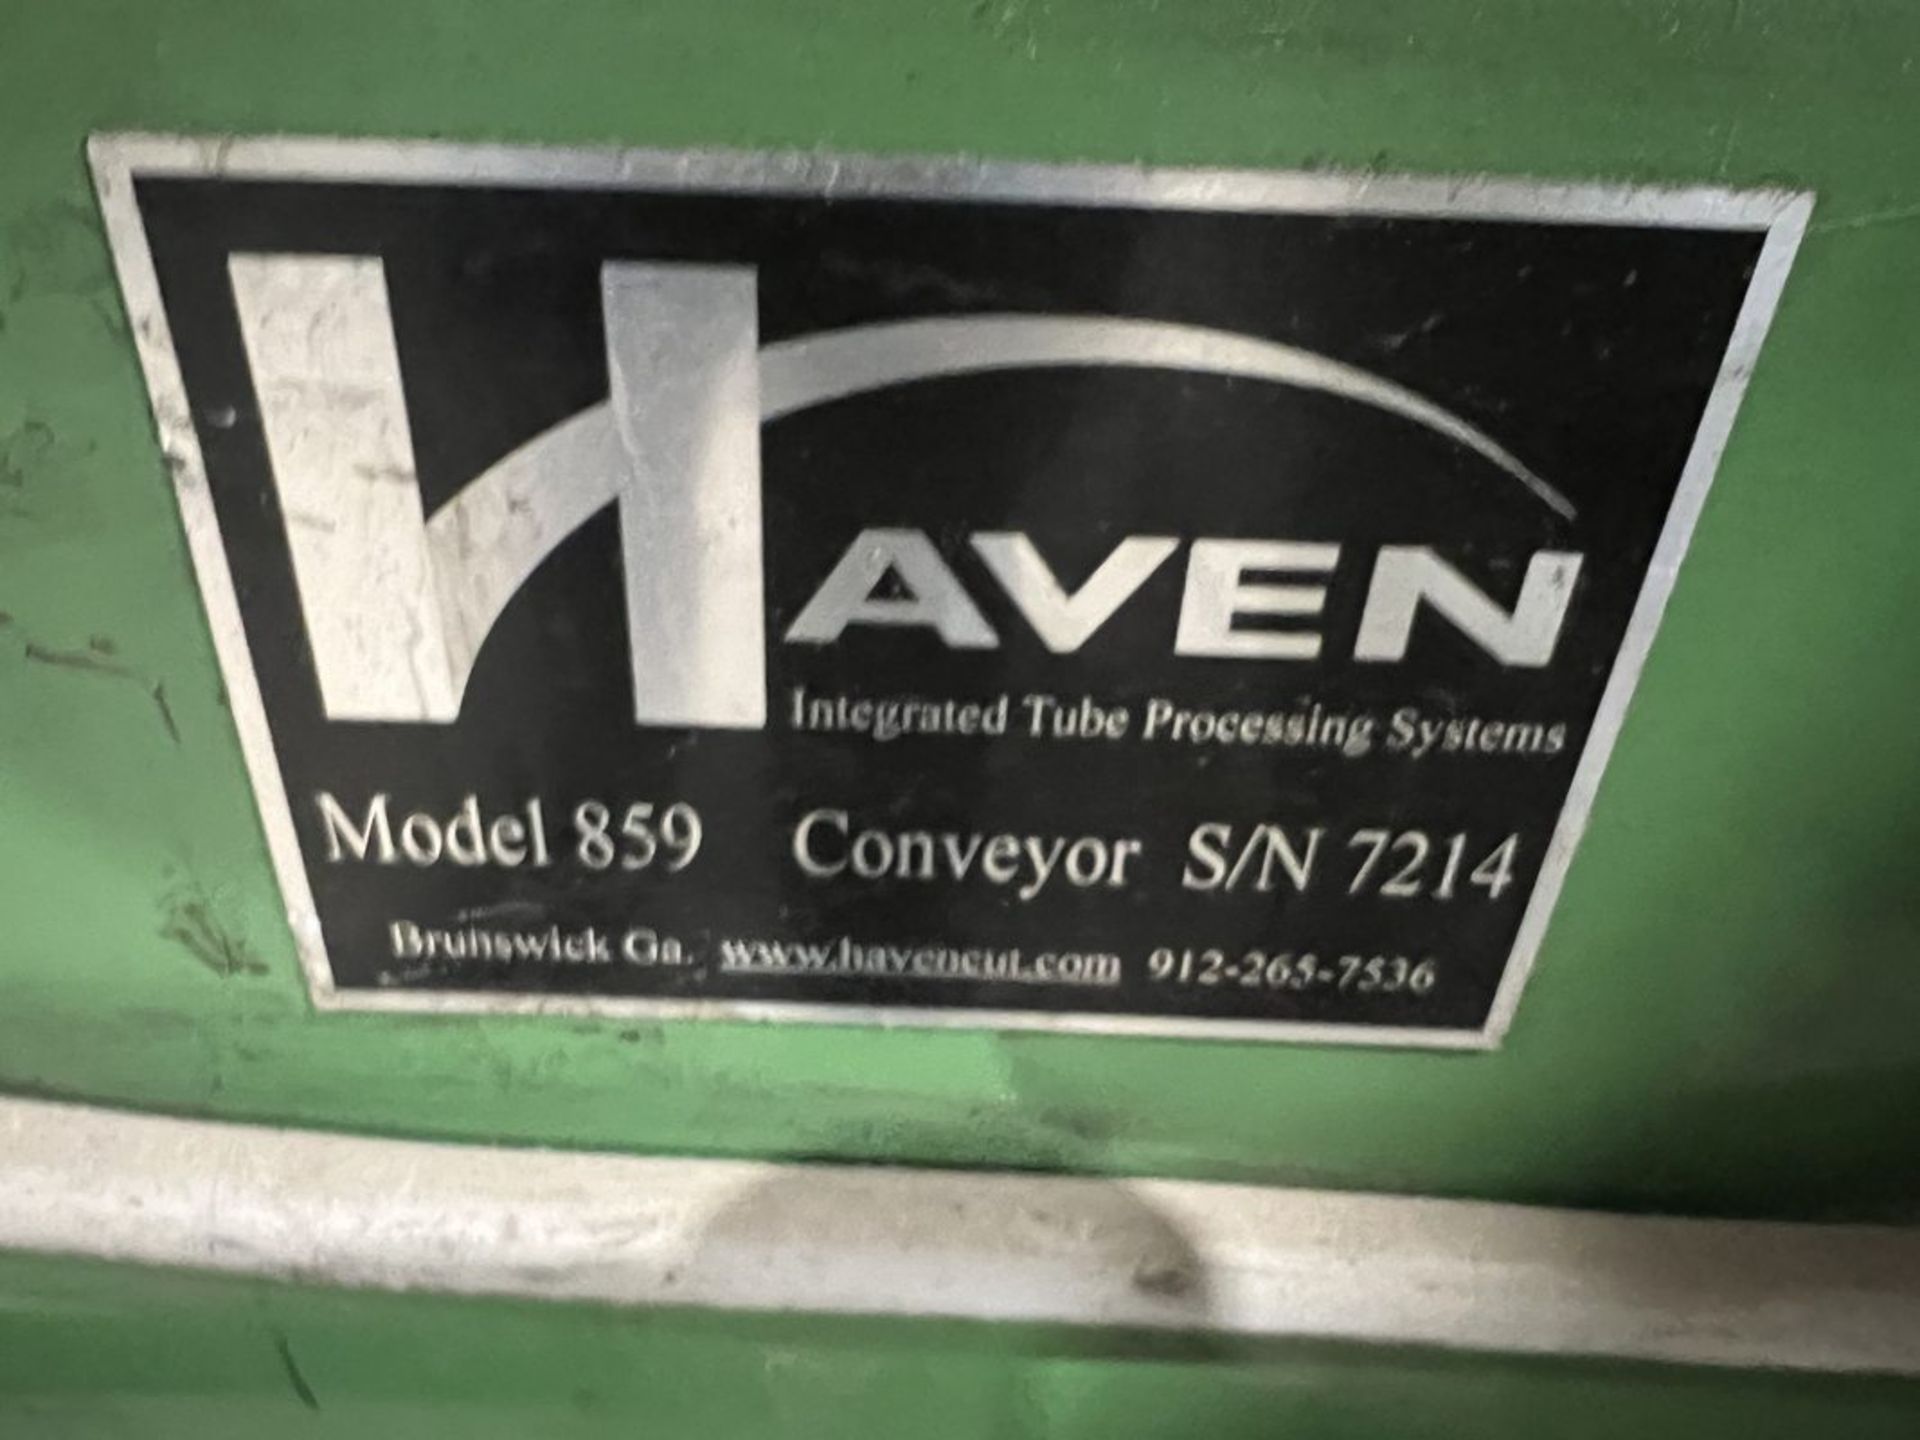 Haven 873 3" Tube Cut Off Machine, S/N 7214, 2013 - Image 26 of 34